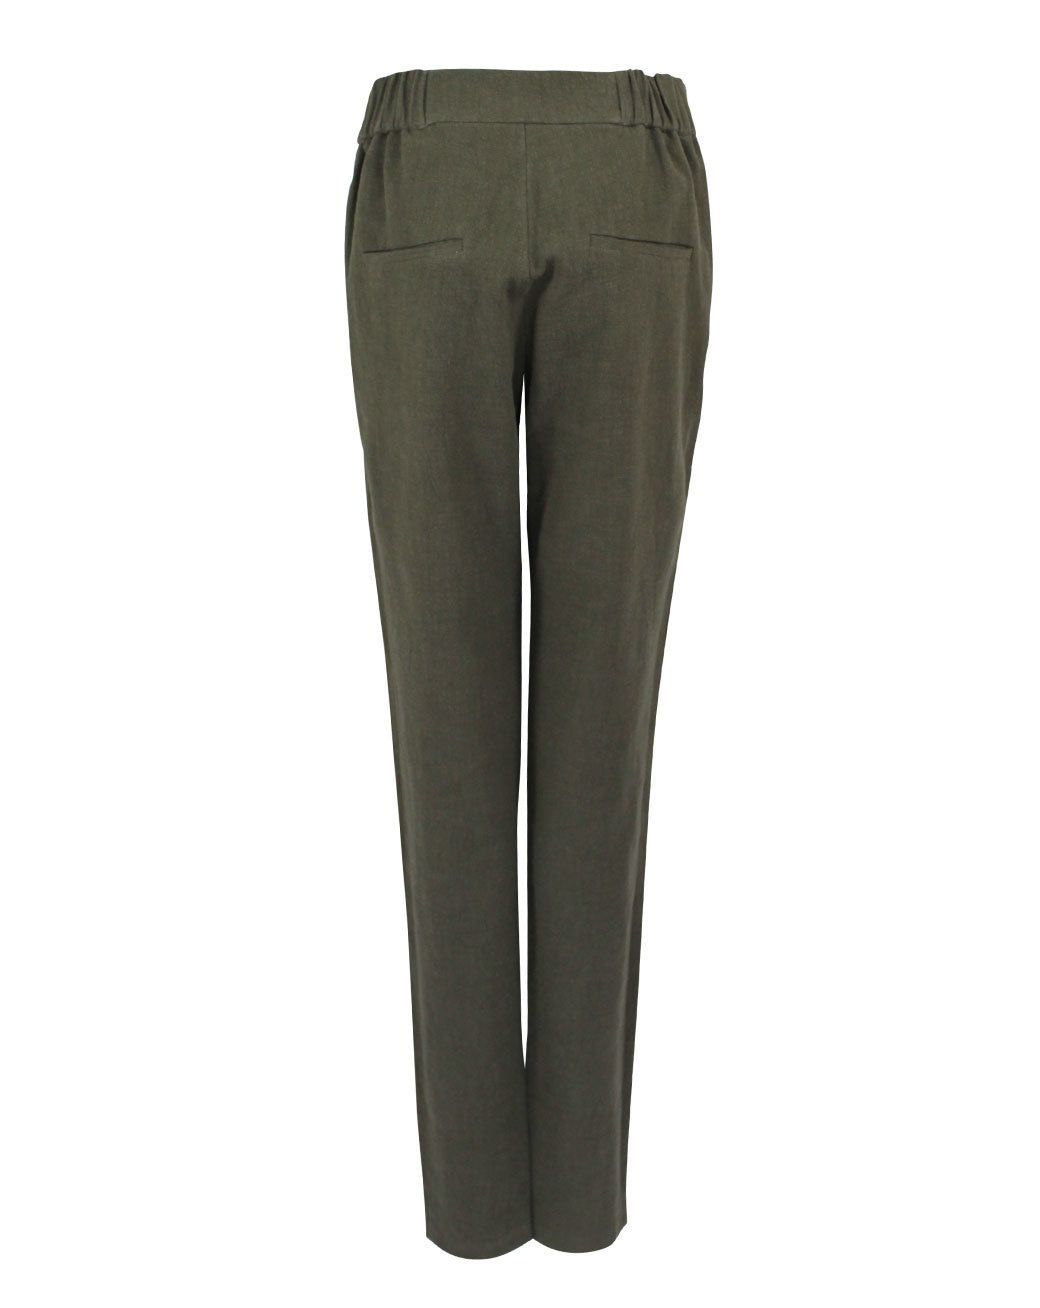 clothing tall women longlady pants norelle